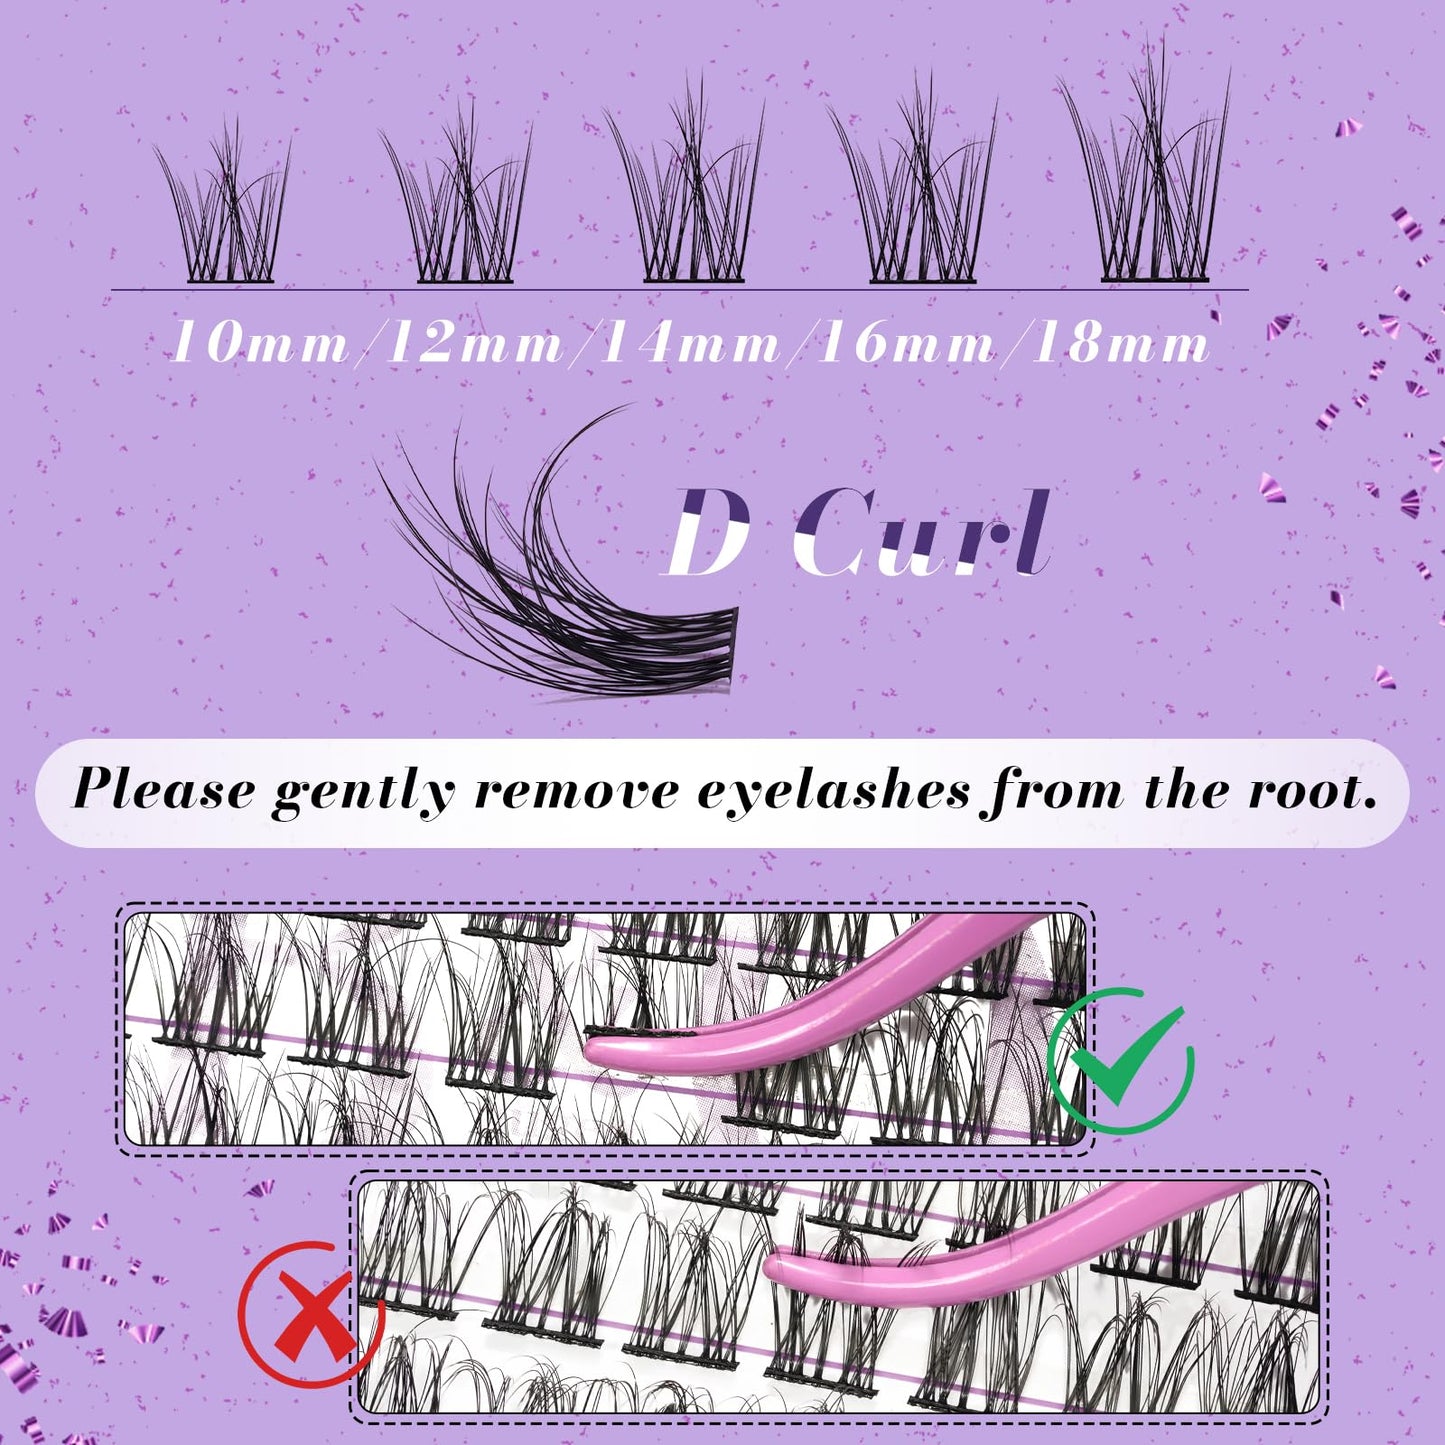 Lash Clusters 144 PCS Individual Lashes B&Q 3D Effect Eyelash Clusters Fluffy Cluster Eyelash Extensions Wispy Eyelashes Natural Look With Long Lasting Curl Cluster Lashes (3D02,10-18mm)